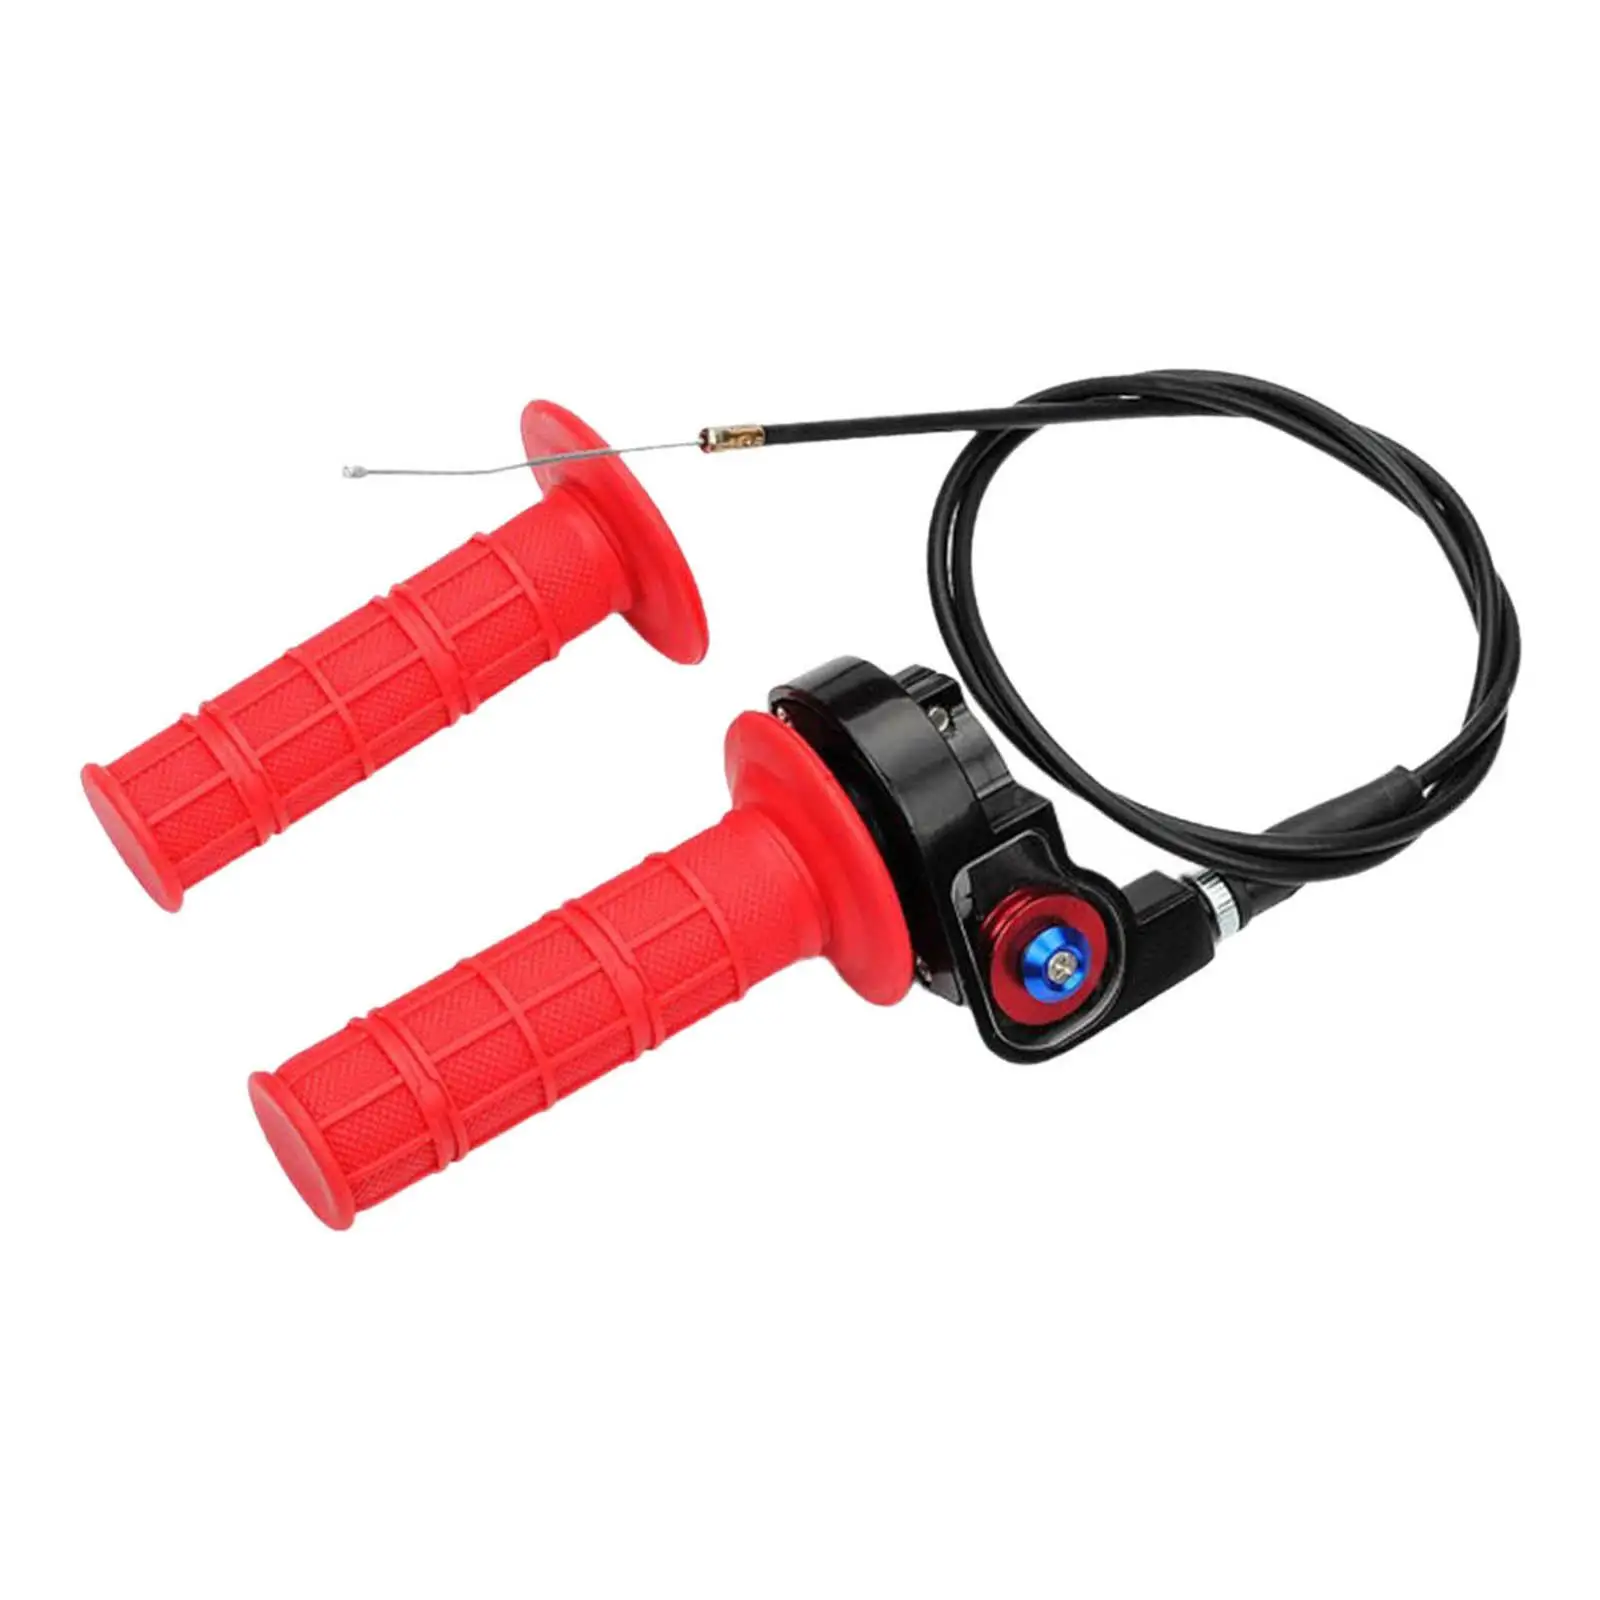 Twist Throttle with Cable Throttle Grips Twist Throttle Accelerator Fits for 150cc-250cc Motocross Motorcycle Bike Dirt Pit Bike